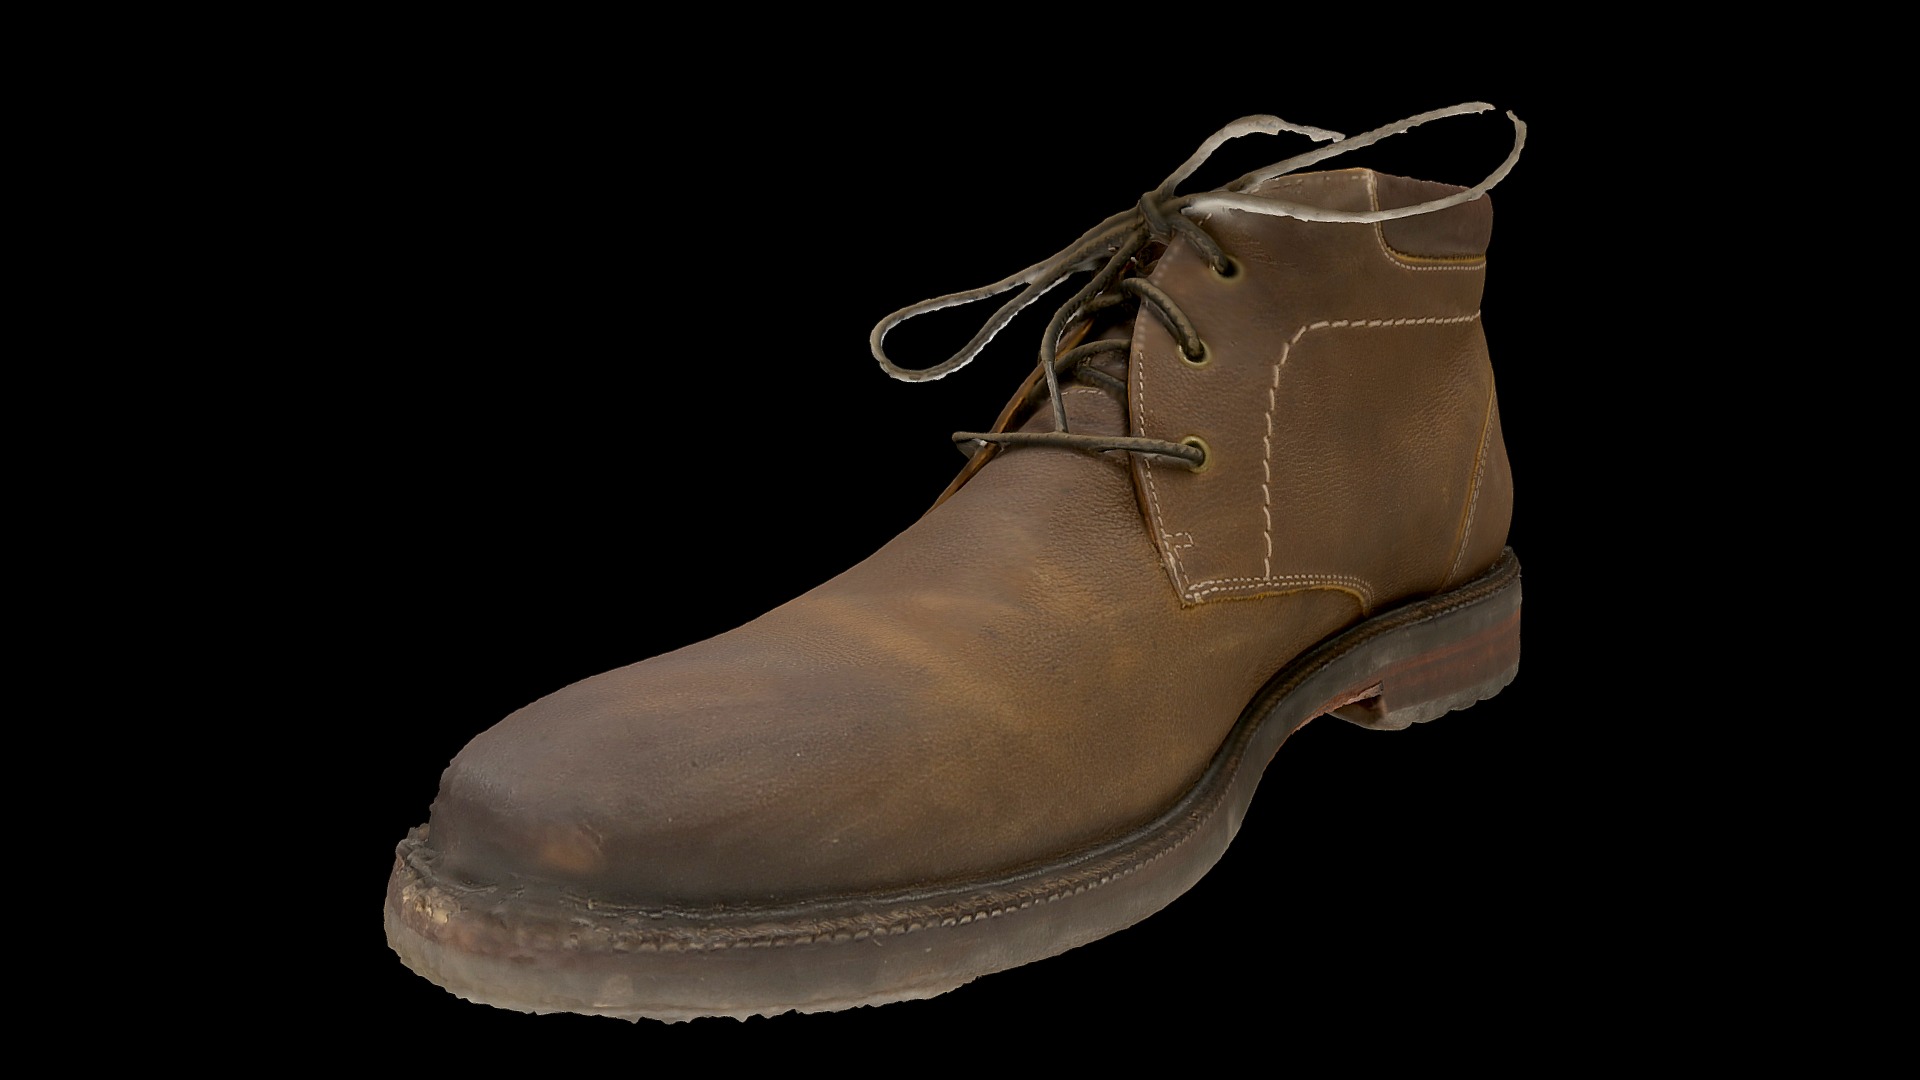 3D model Chaussure - This is a 3D model of the Chaussure. The 3D model is about a close-up of a boot.